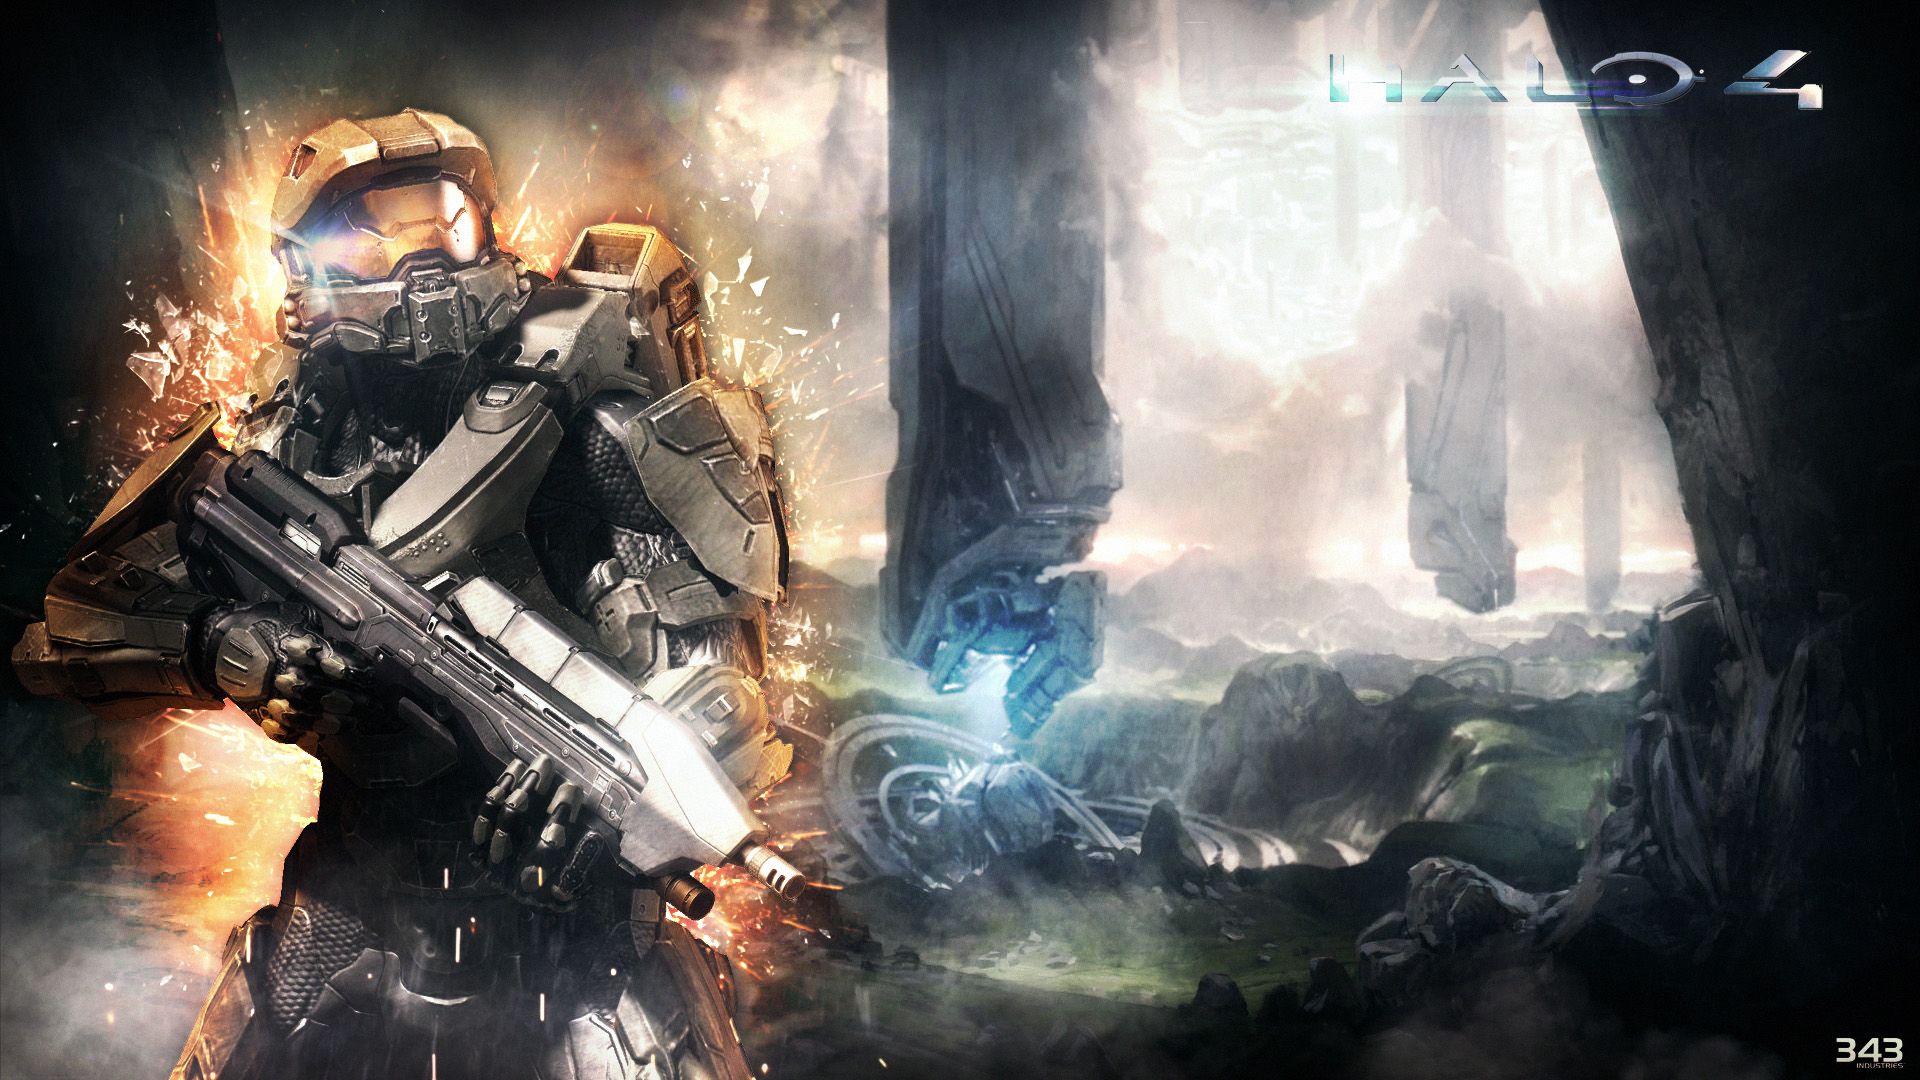 Halo 4 Wallpapers Hd - 1711821